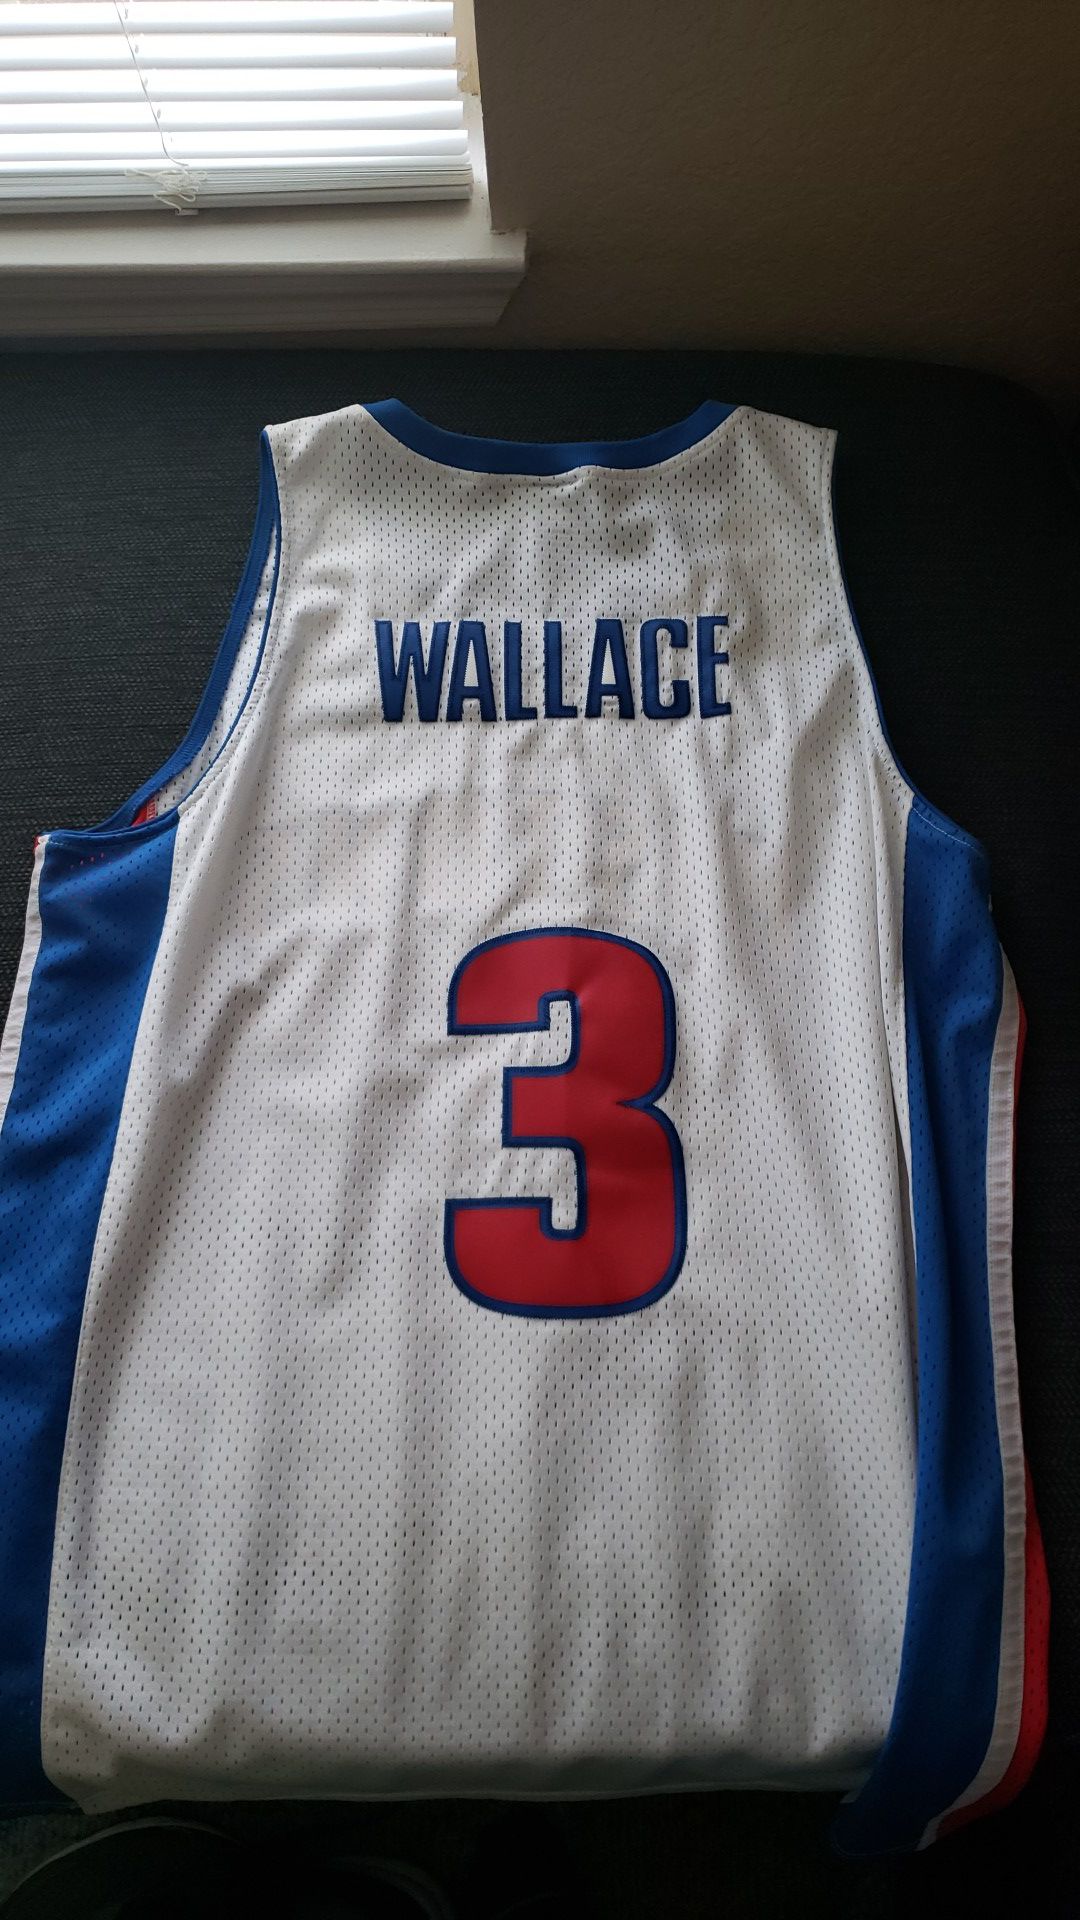 Ben Wallace Jersey for Sale in Pico Rivera, CA - OfferUp